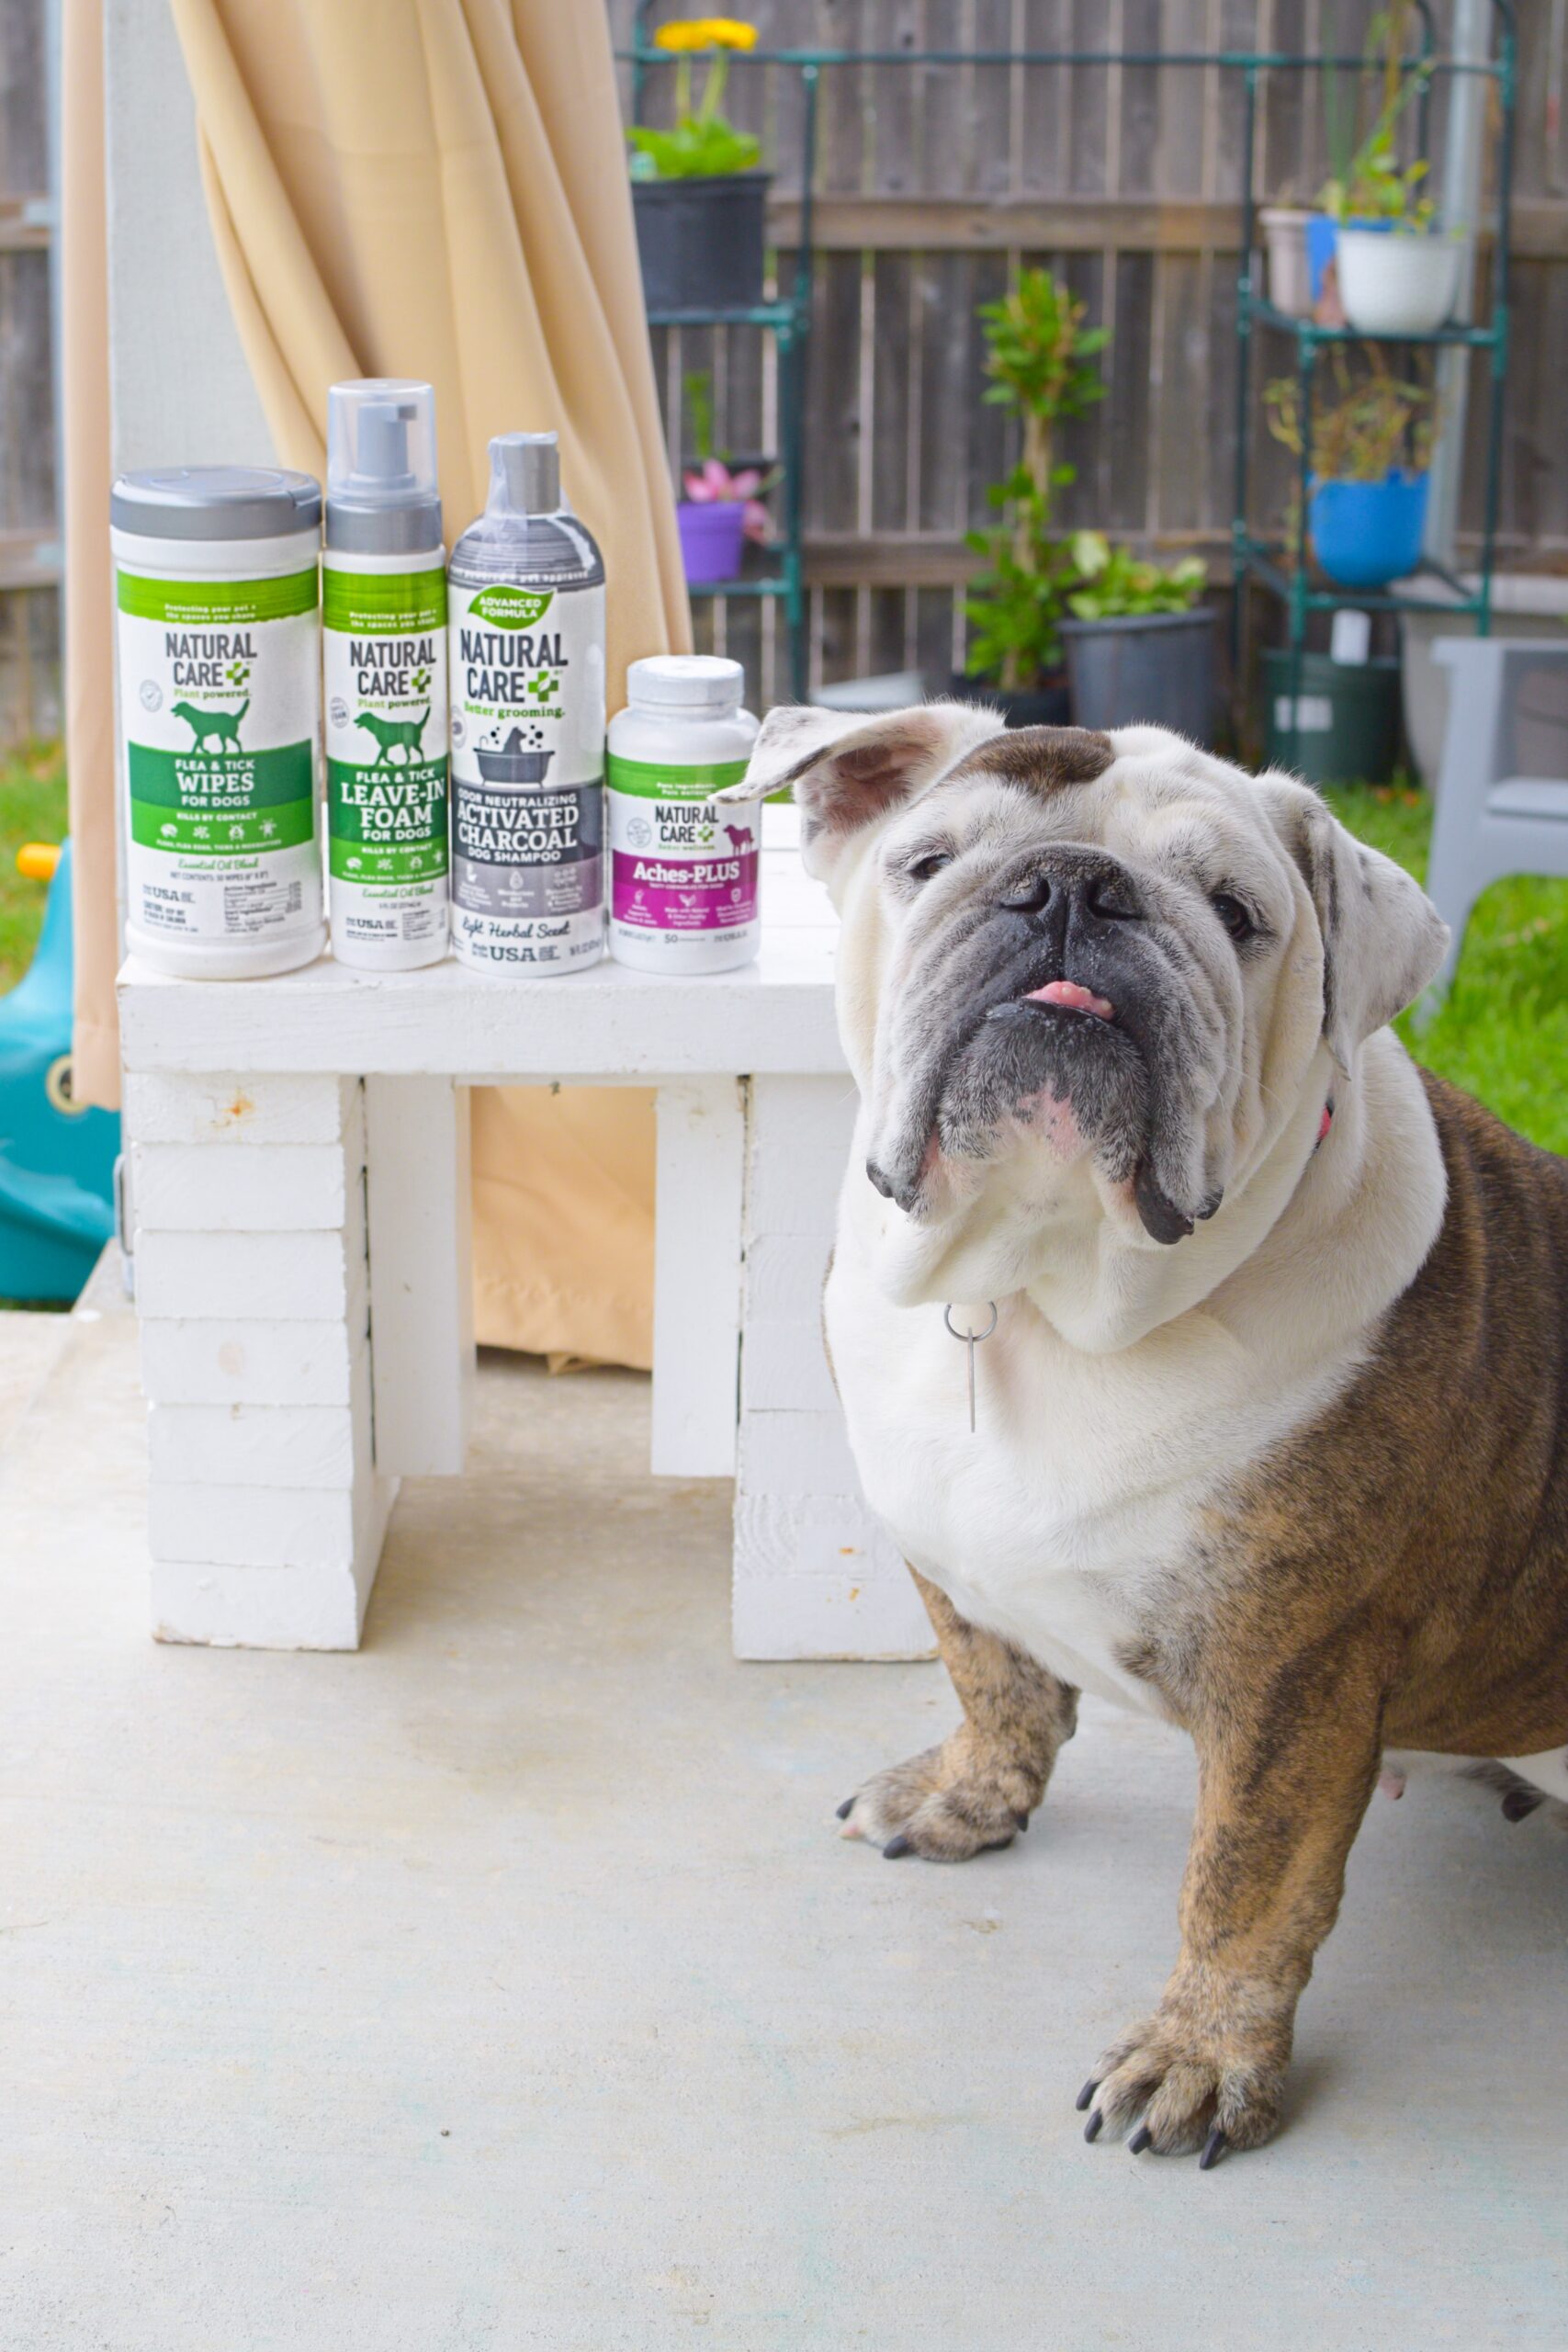 Natural Care pet products